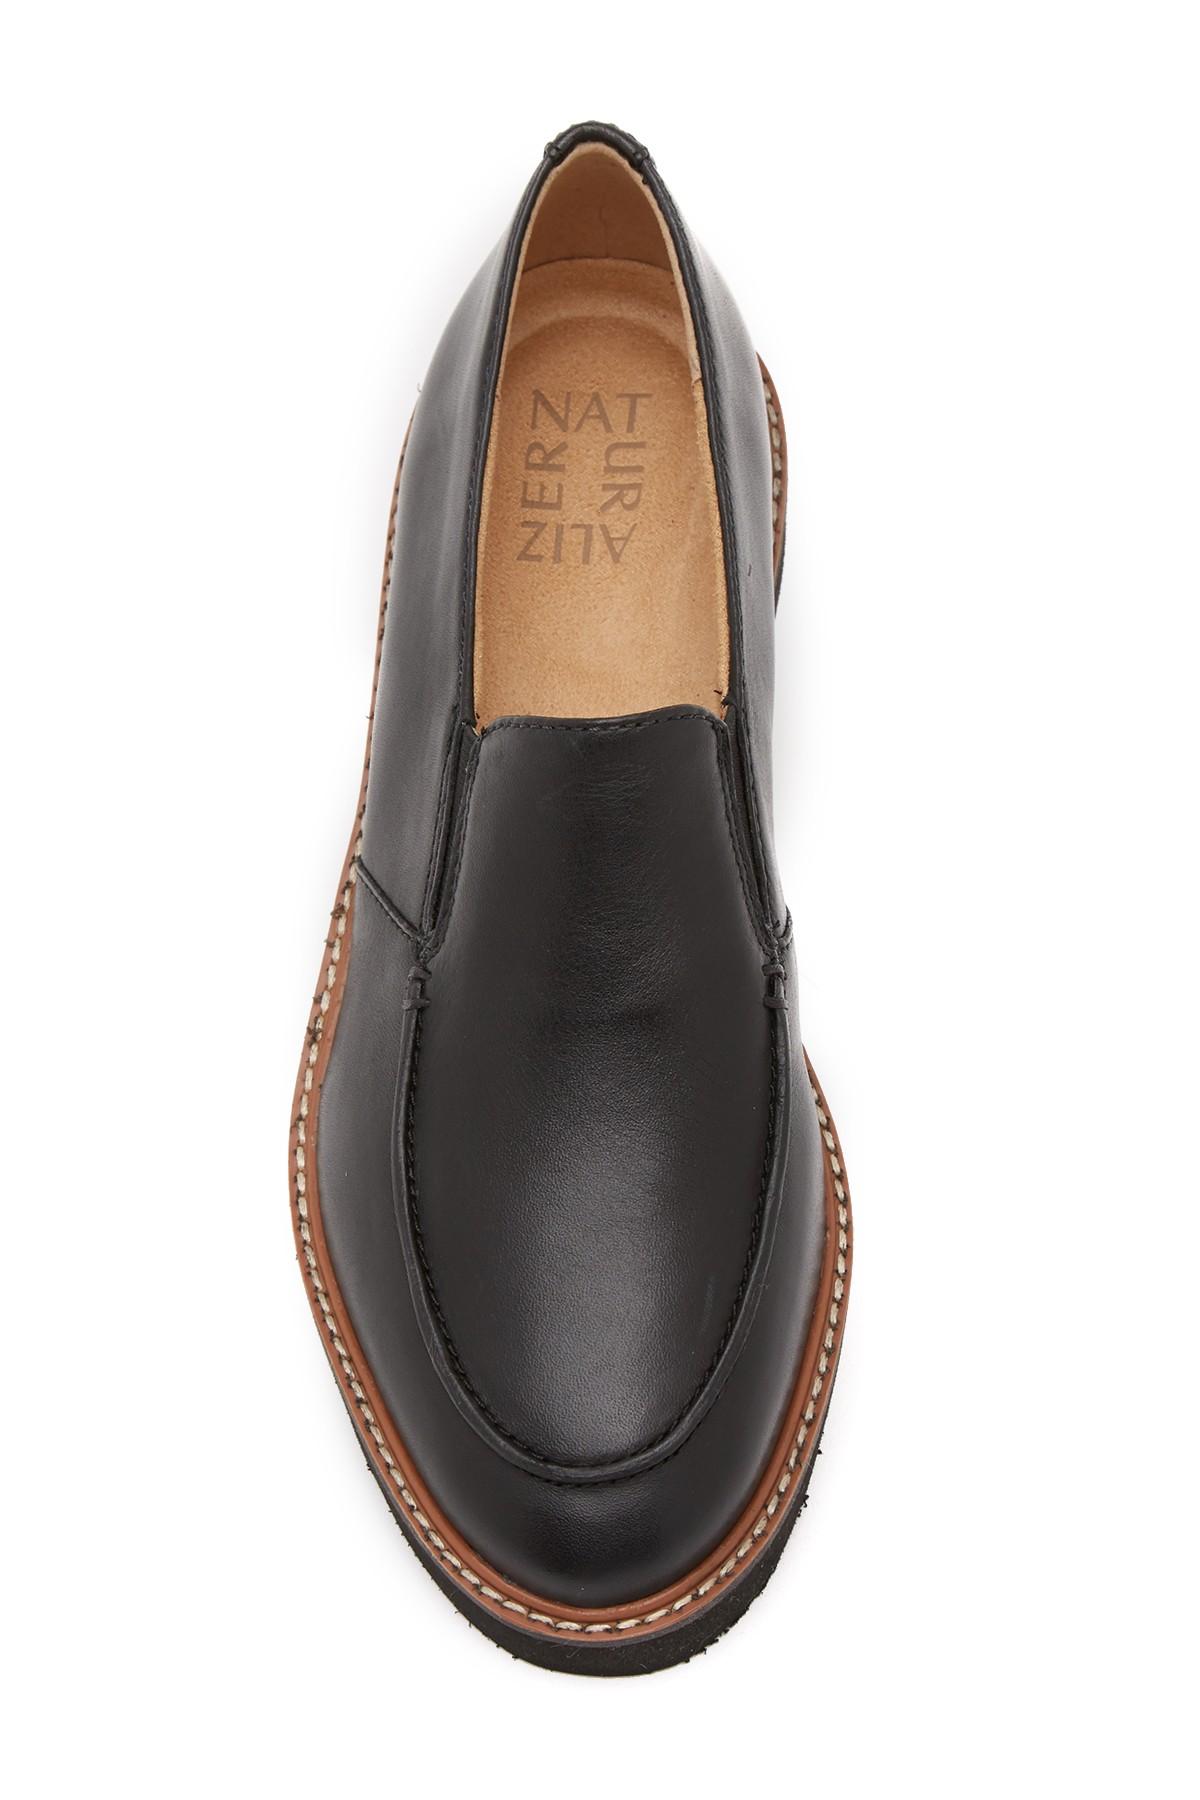 Naturalizer Leather Aibileen Loafer 